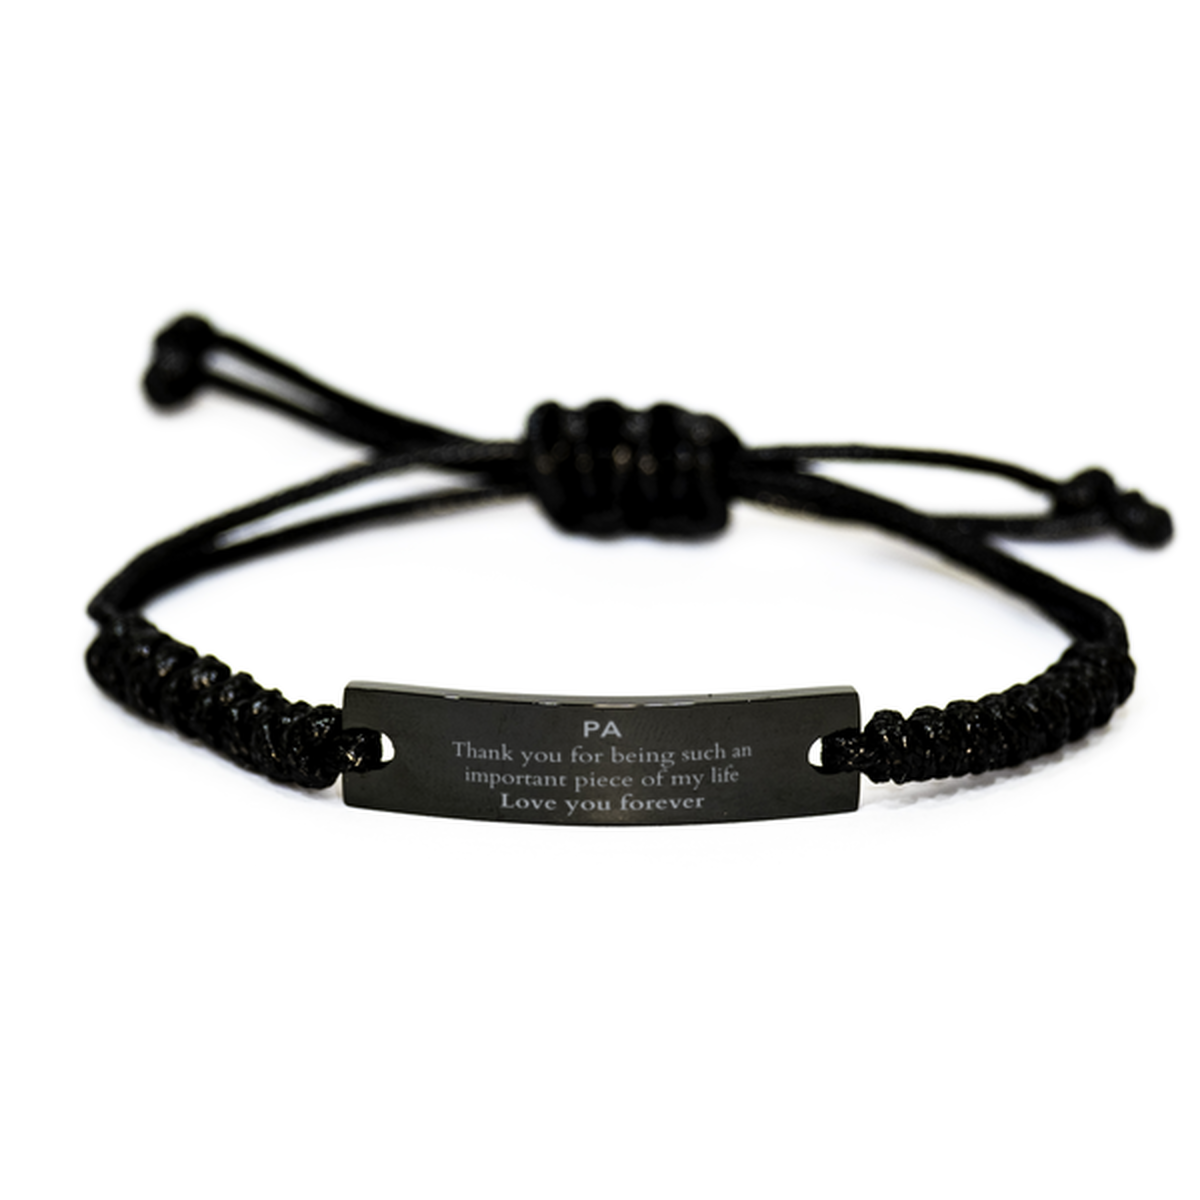 Appropriate Pa Black Rope Bracelet Epic Birthday Gifts for Pa Thank you for being such an important piece of my life Pa Christmas Mothers Fathers Day